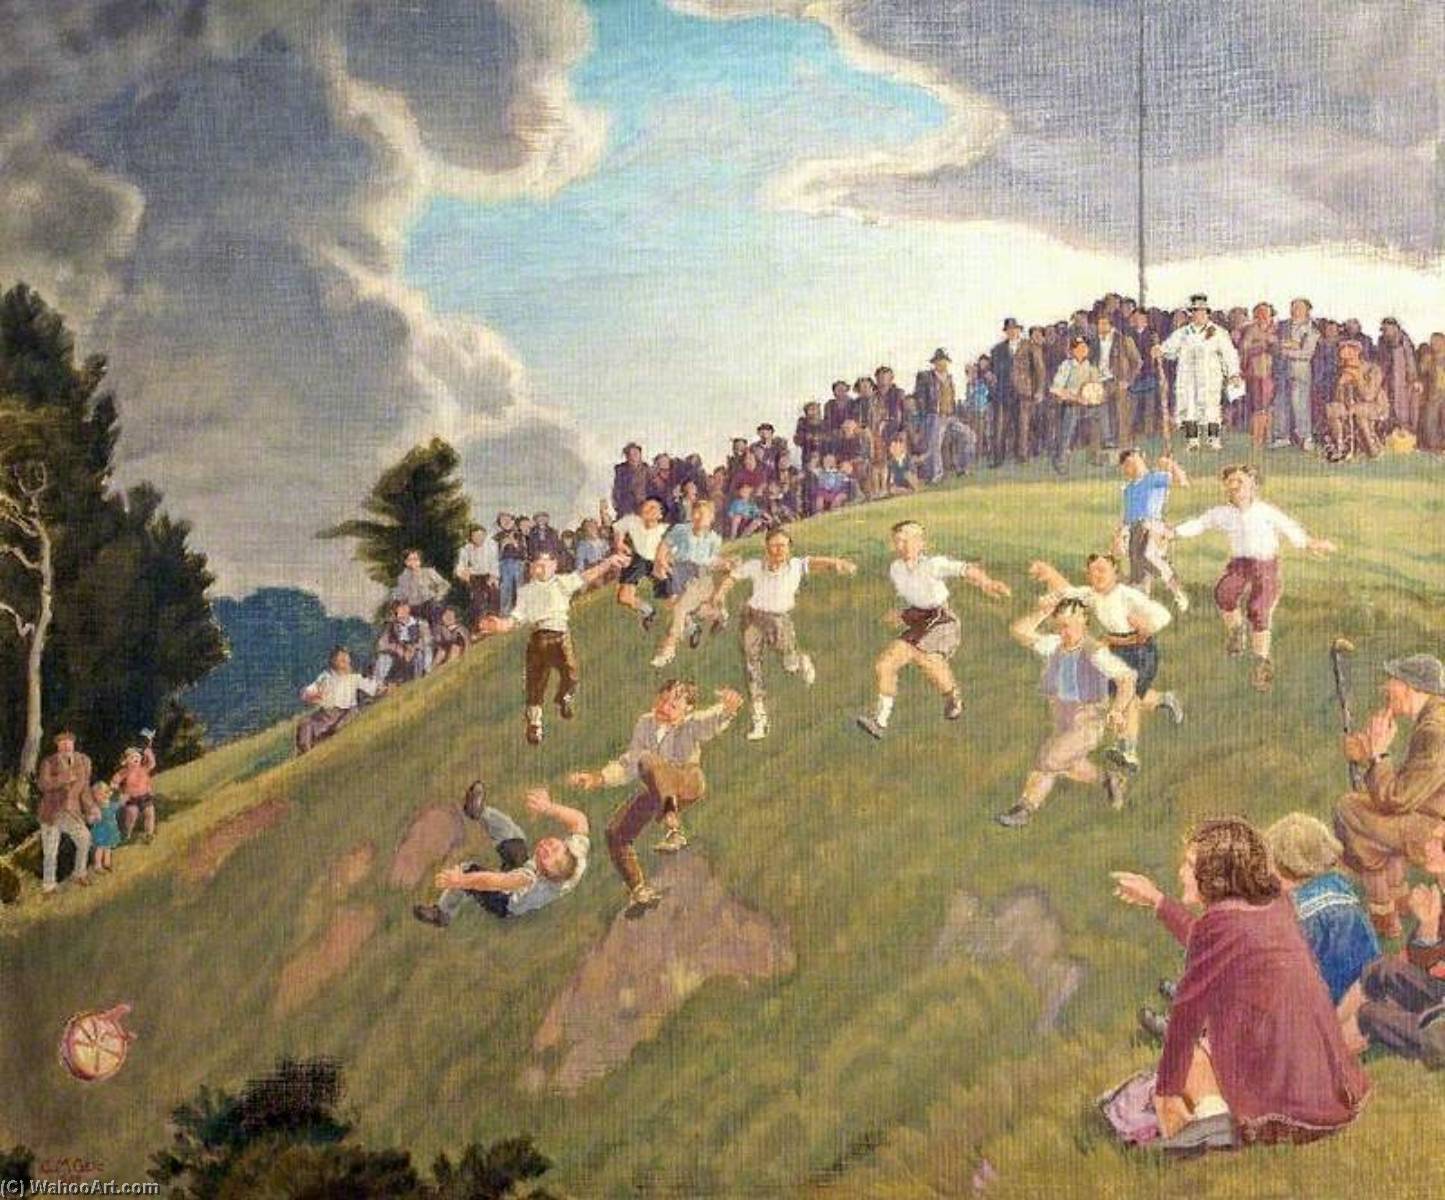 WikiOO.org - Enciclopédia das Belas Artes - Pintura, Arte por Charles March Gere - Cheese Rolling on Cooper's Hill, Gloucestershire